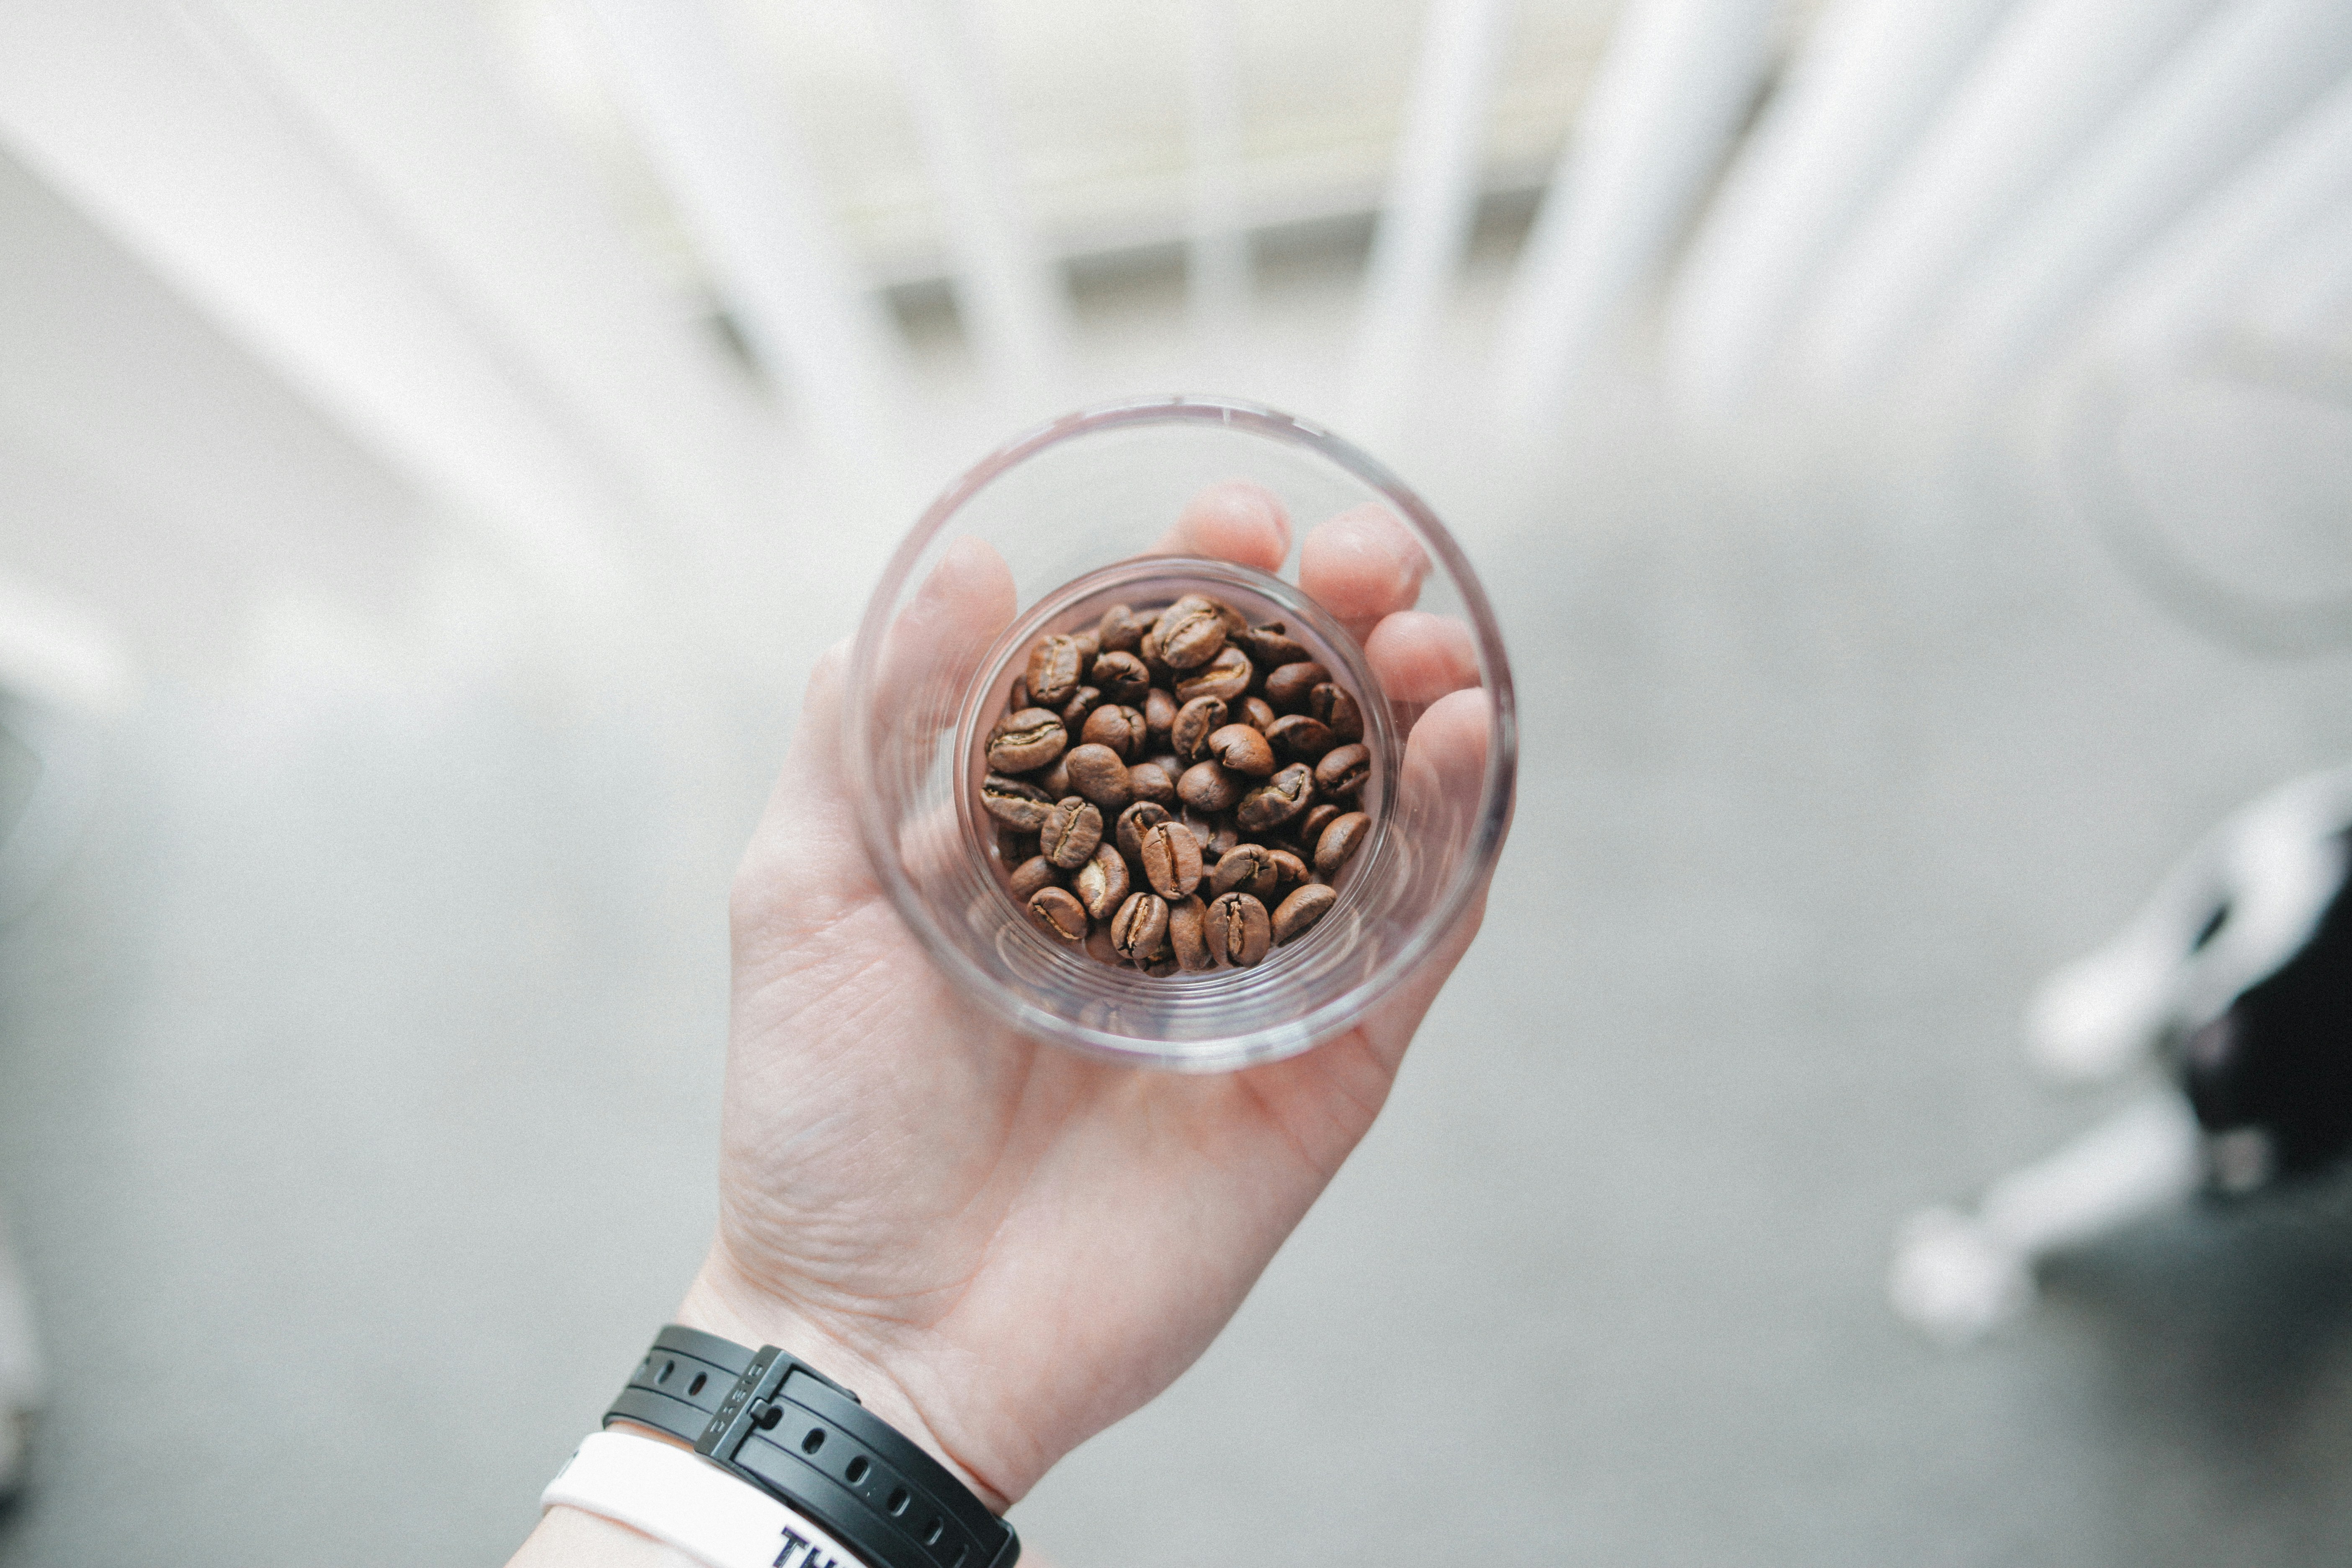 I always love taking photos of small objects by a window in my apartment. I was making coffee one morning and the thought just struck me to show off these coffee beans, and what you see is what came of it.